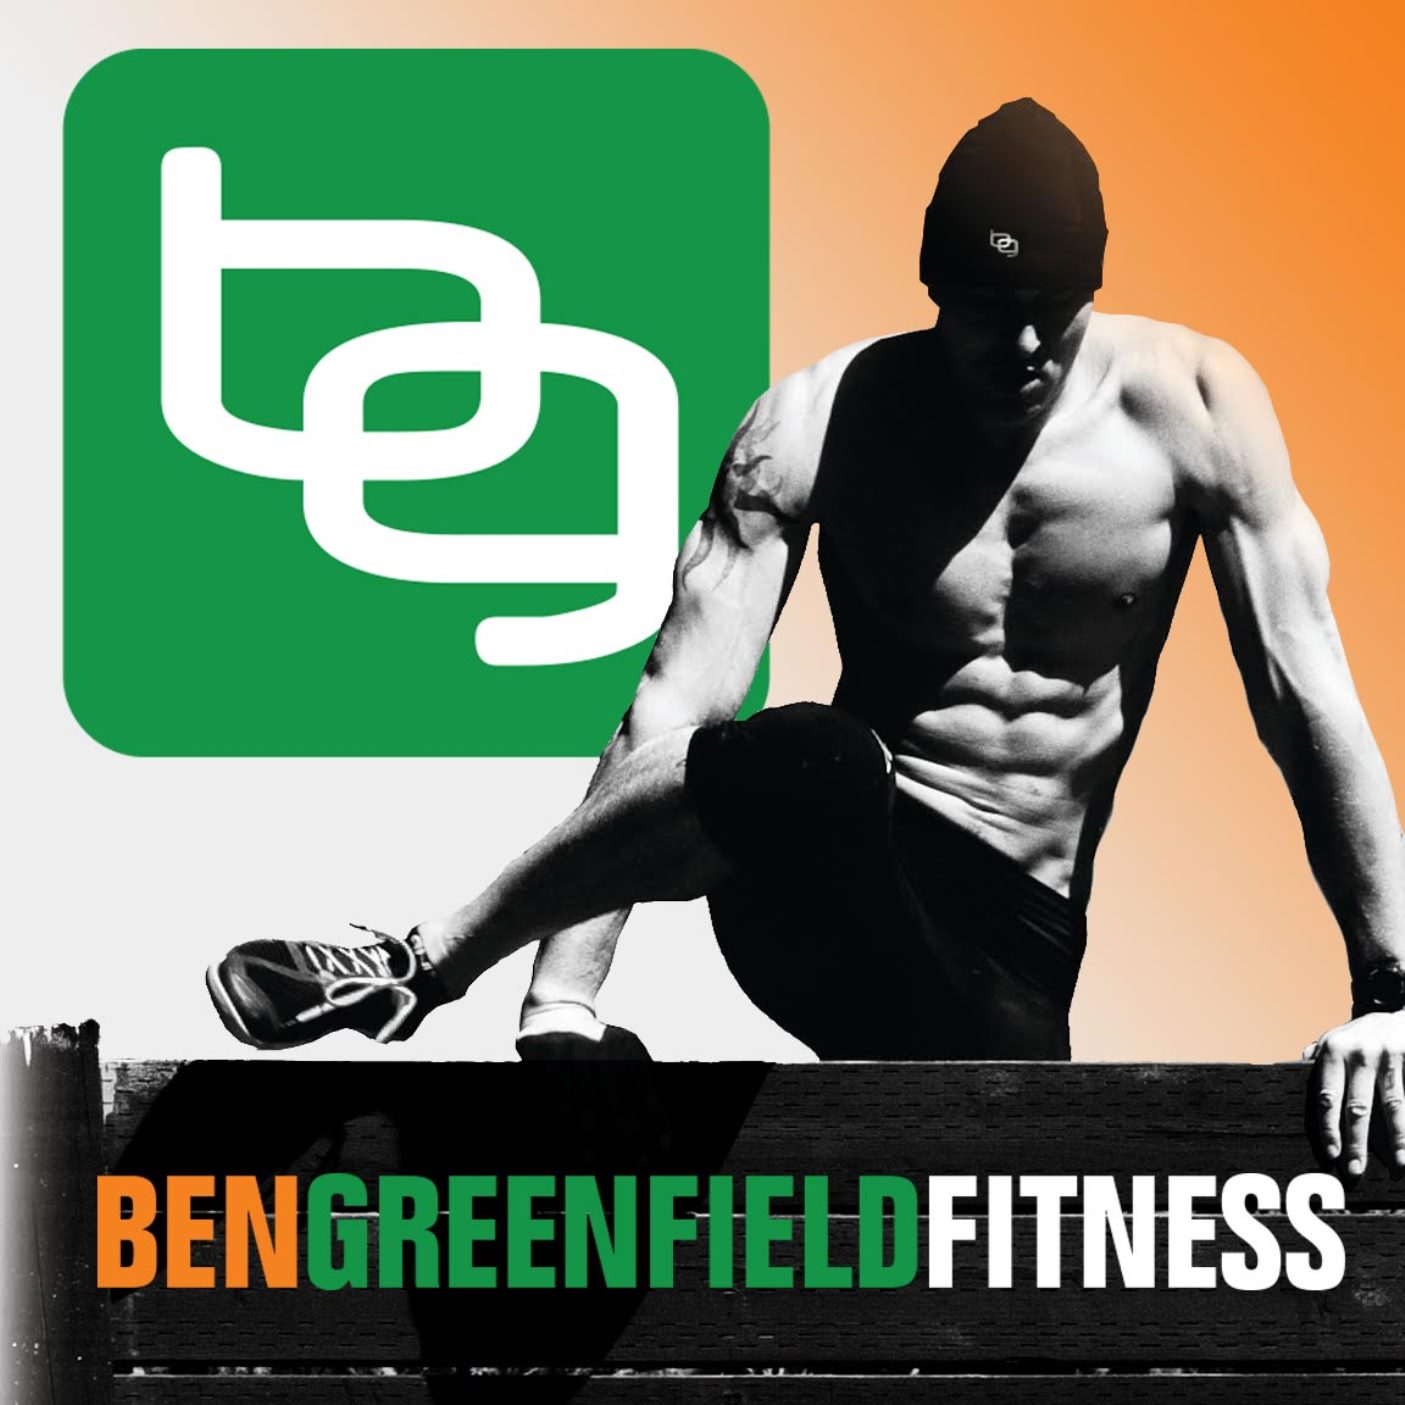 Ben's Recommended Strength Training Protocol: Compound Exercises 2-3x Per Week